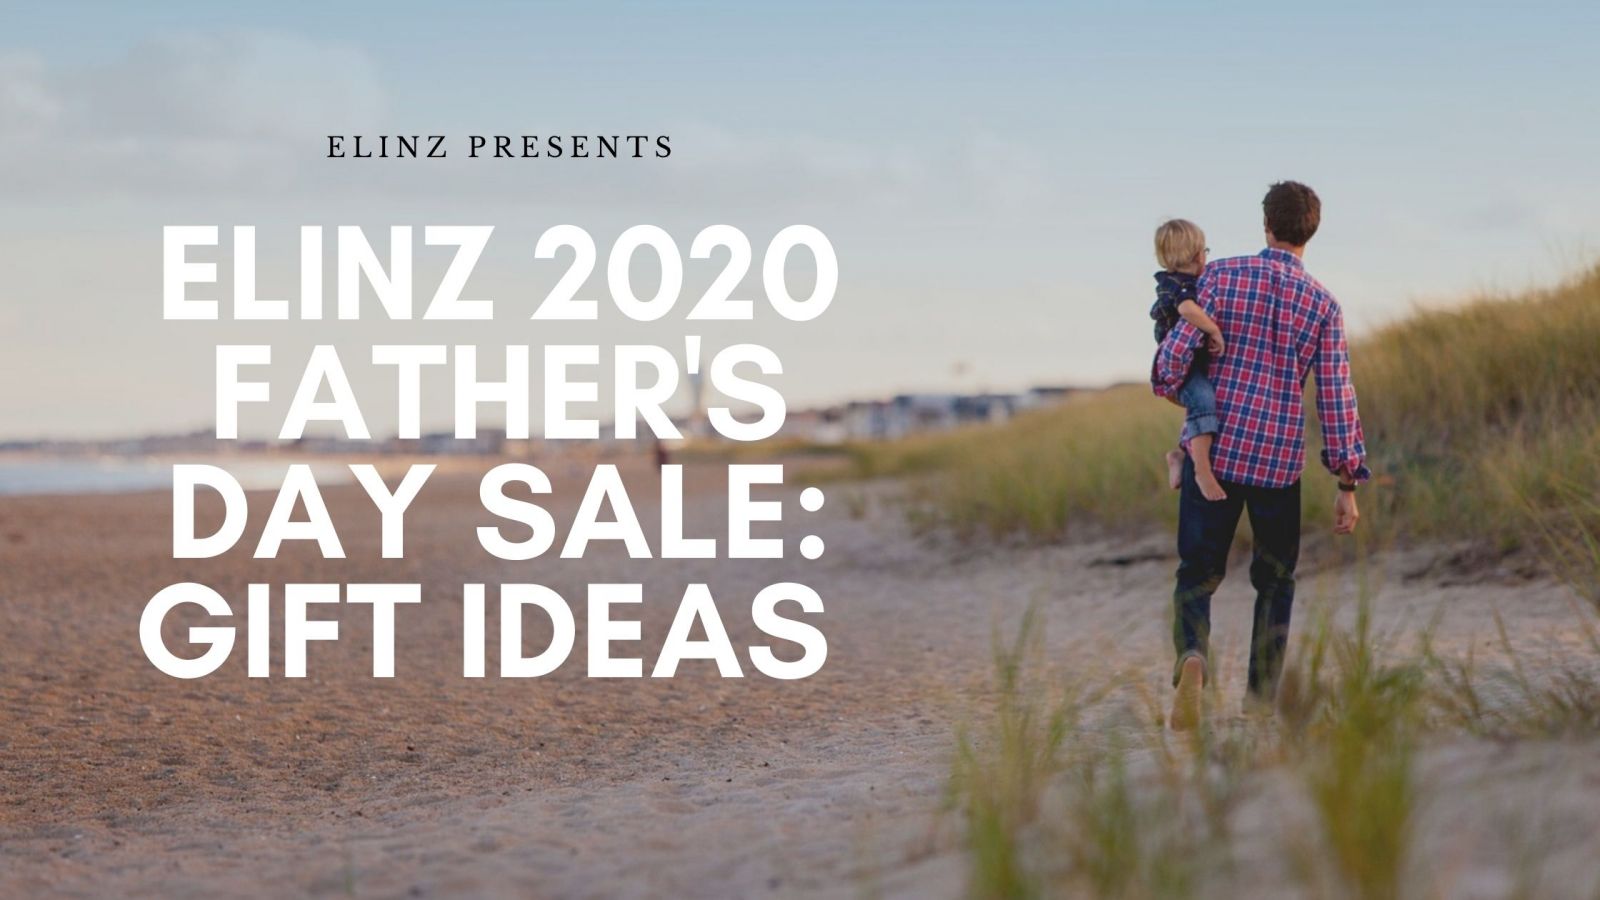 Elinz Father's Day Sale 2020 blog banner